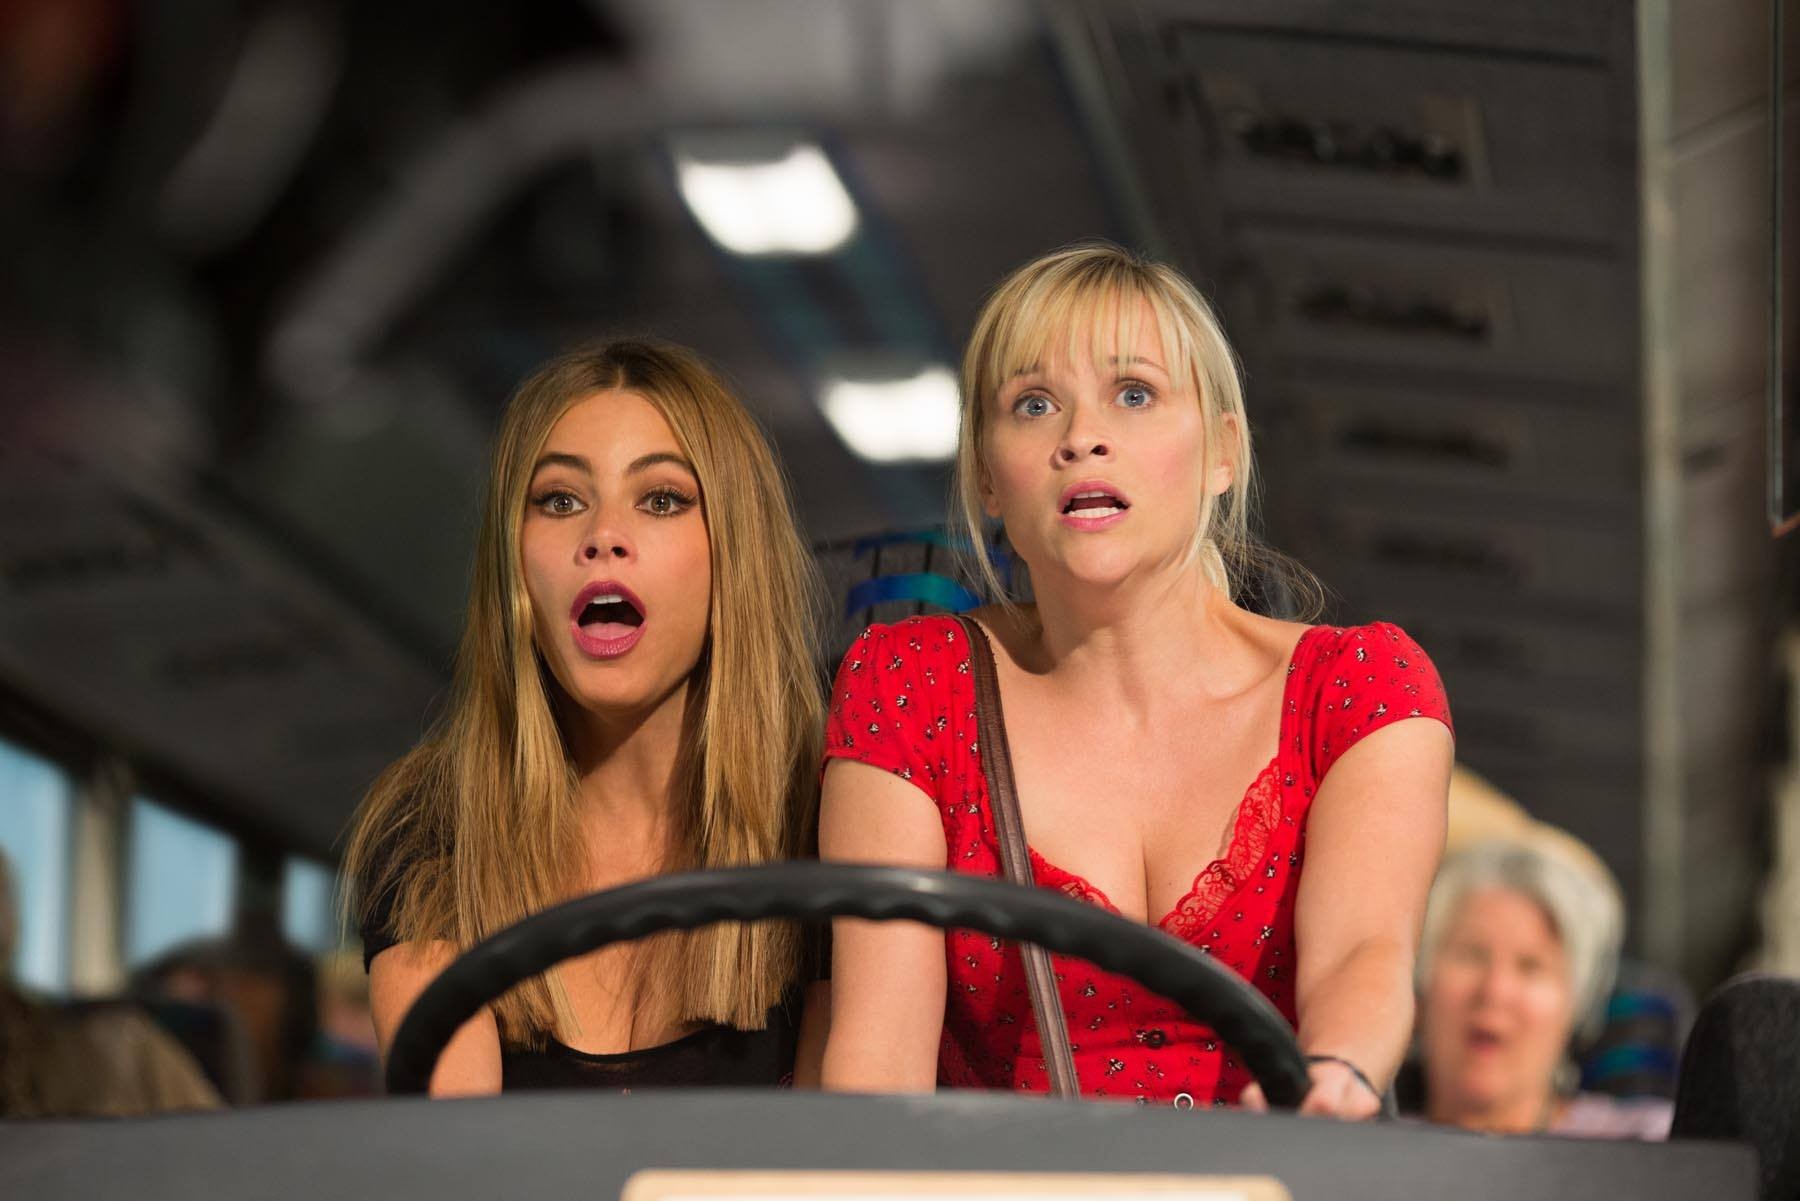 Sofia Vergara stars as Daniella and Reese Witherspoon stars as Cooper in Warner Bros. Pictures' Hot Pursuit (2015)